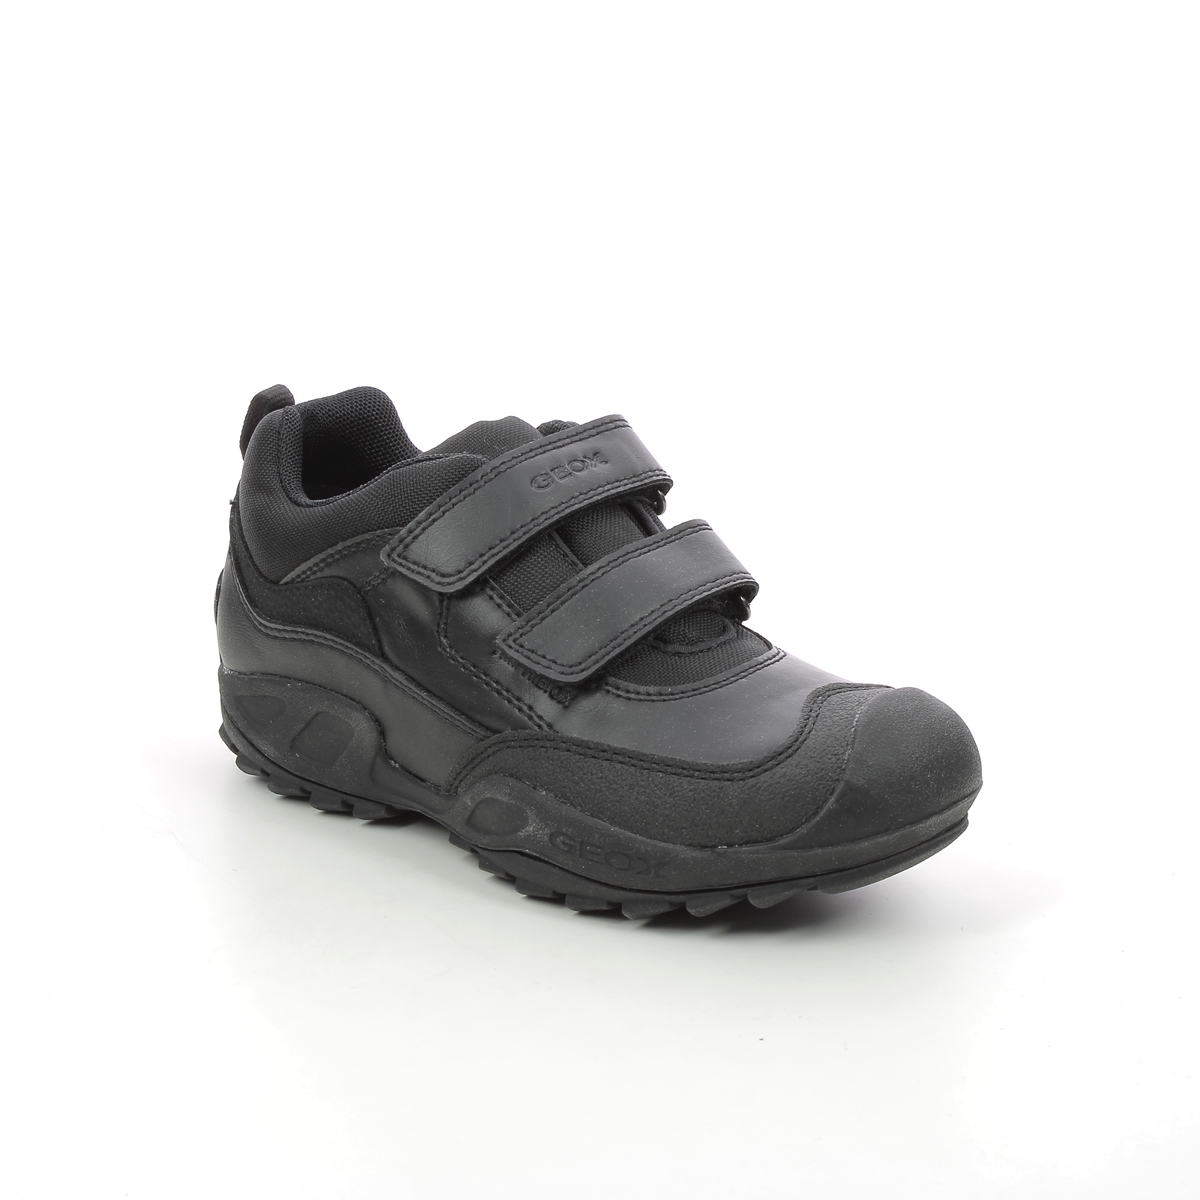 Geox - New Savage Tex (Black) J841Wb-C9999 In Size 33 In Plain Black For School For kids